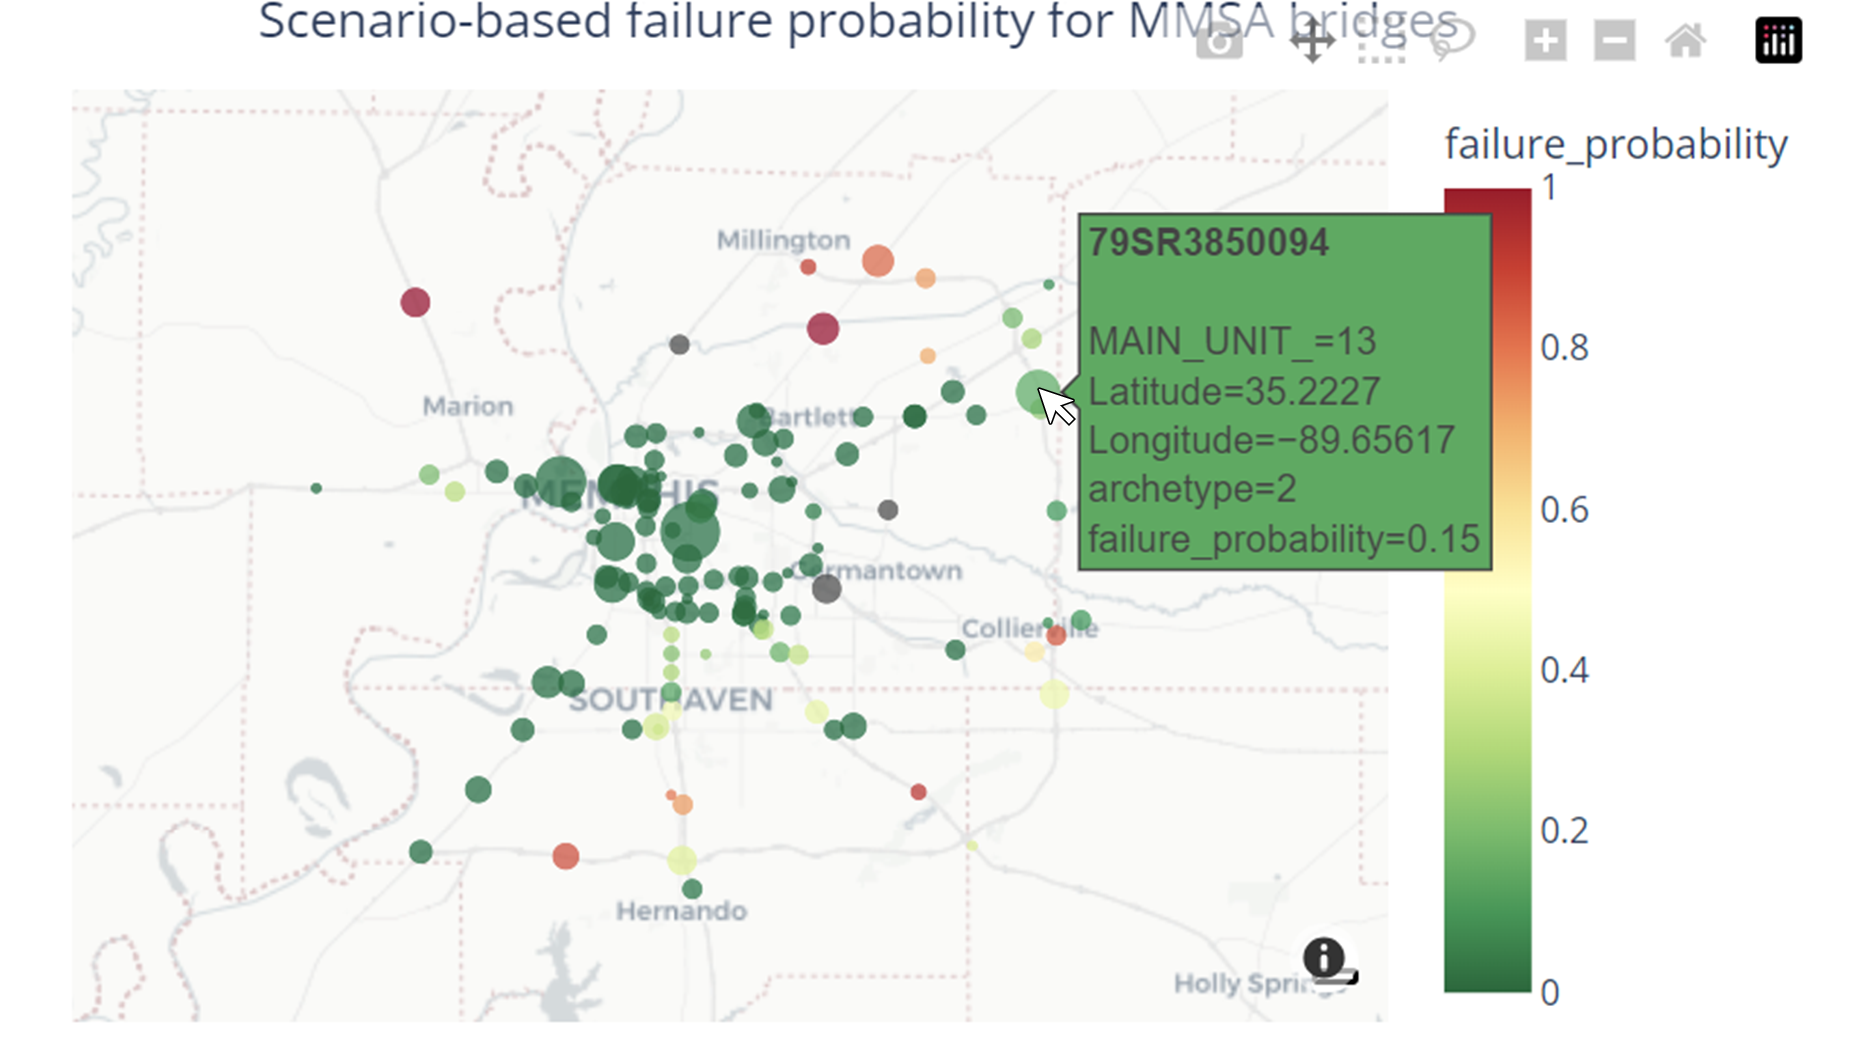 Figure 5. Visualization of the (Monte Carlo-based) failure probability using interactive plots